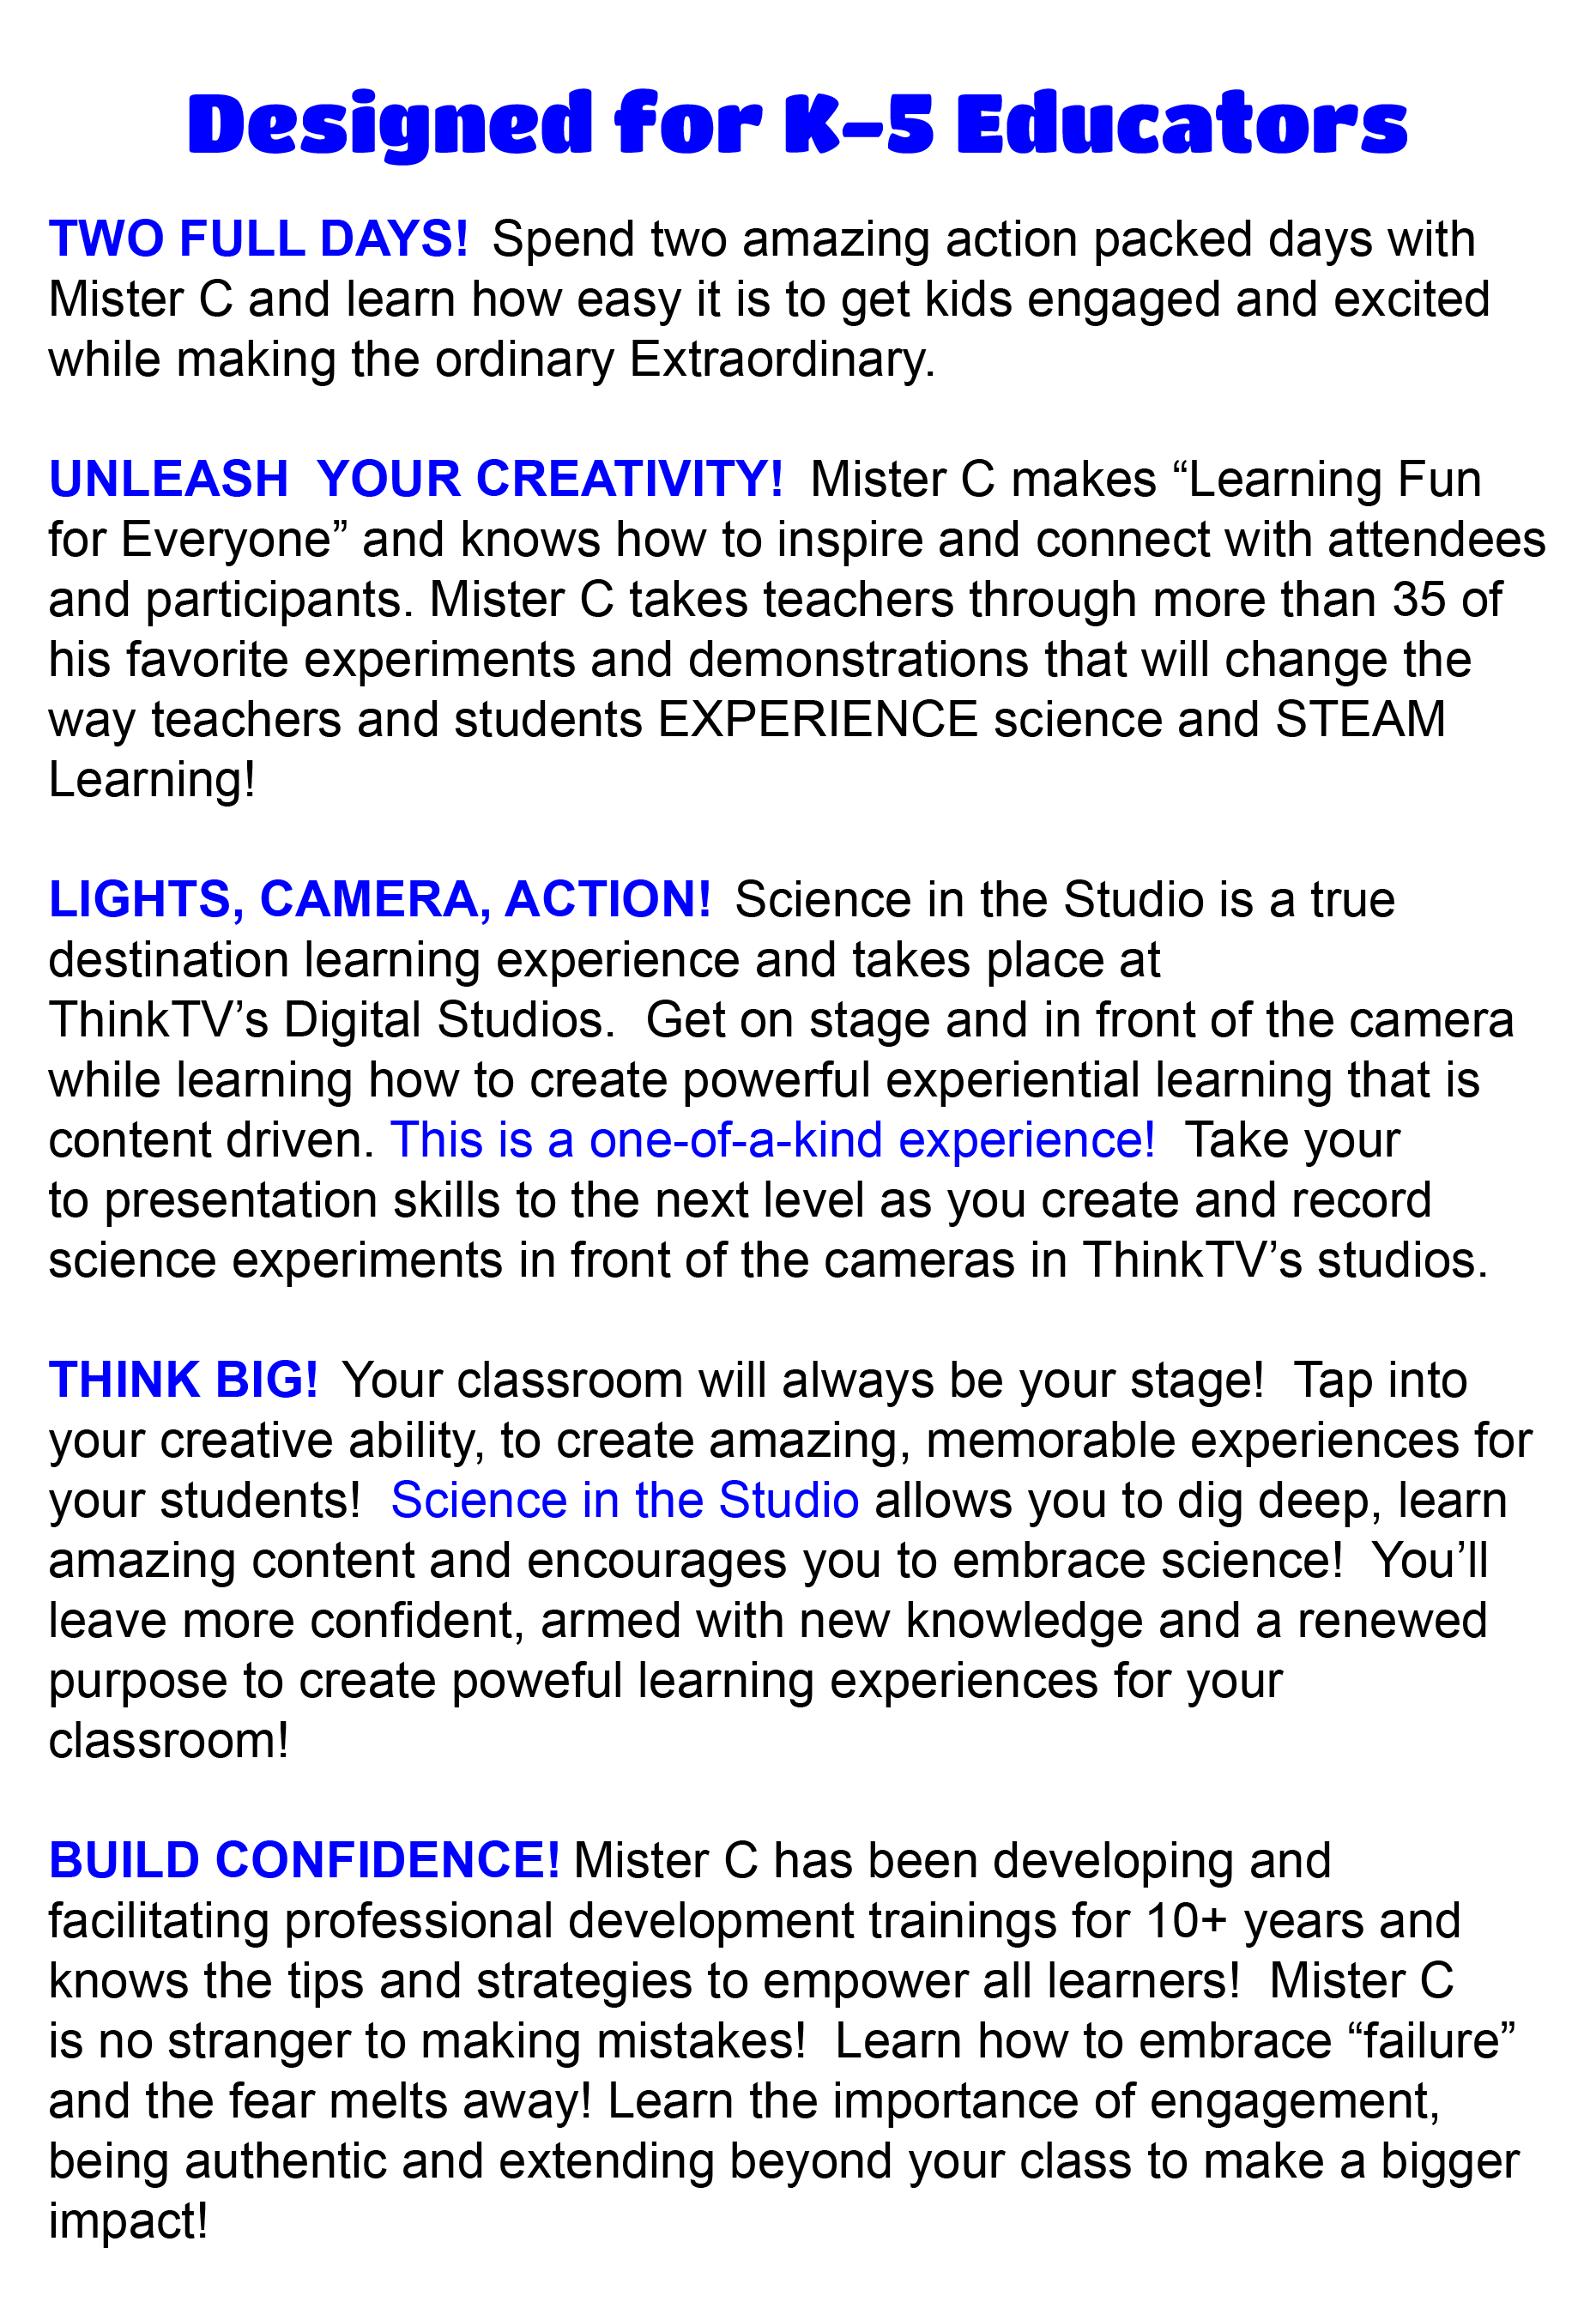 TWO FULL DAYS! Spend two amazing action packed days with Mister C and learn how easy it is to get kids engaged and excited while making ordinary Extraordinary. UNLEASH YOUR CREATIVITY! Mister C makes âLearning Fun for Everyoneâ and knows how to inspire and connect with attendees and participants. Mister C takes teachers through more than 35 of his favorite experiments and demonstrations that will change the way teachers and students EXPERIENCE science and STEAM Learning!LIGHTS, CAMERA, ACTION! Science in the Studio is a true destination learning experience and takes place at ThinkTVâs Digital Studios. Get on stage and in front of the camera while learning how to create powerful experiential learning that is content driven. This is a one-of-a-kind experience!Mister C takes attendees through his four Eâs which will inspire even the most reluctant educator to try new and exciting experiments, demonstrations, and engineering design challenges. Take your to presentation skills to the next level as you create and record science experiments in front of the cameras in ThinkTVâs studios.THINK BIG! Your classroom will always be your stage! Tap into your creative ability, to create amazing, memorable experiences for your students! Science in the Studio allows you to dig deep, learn amazing content and encourages you to embrace science! Youâll leave more confident, armed with new knowledge and a renewed purpose to create amazing, memorable experiences for your classroom! Build Confidence! Mister C is no stranger to making mistakes and helps attendees realize to embrace fear of failure to make learning even more memorable. Learn the importance of engagement, being authentic and extending beyond your class to make a bigger impact!